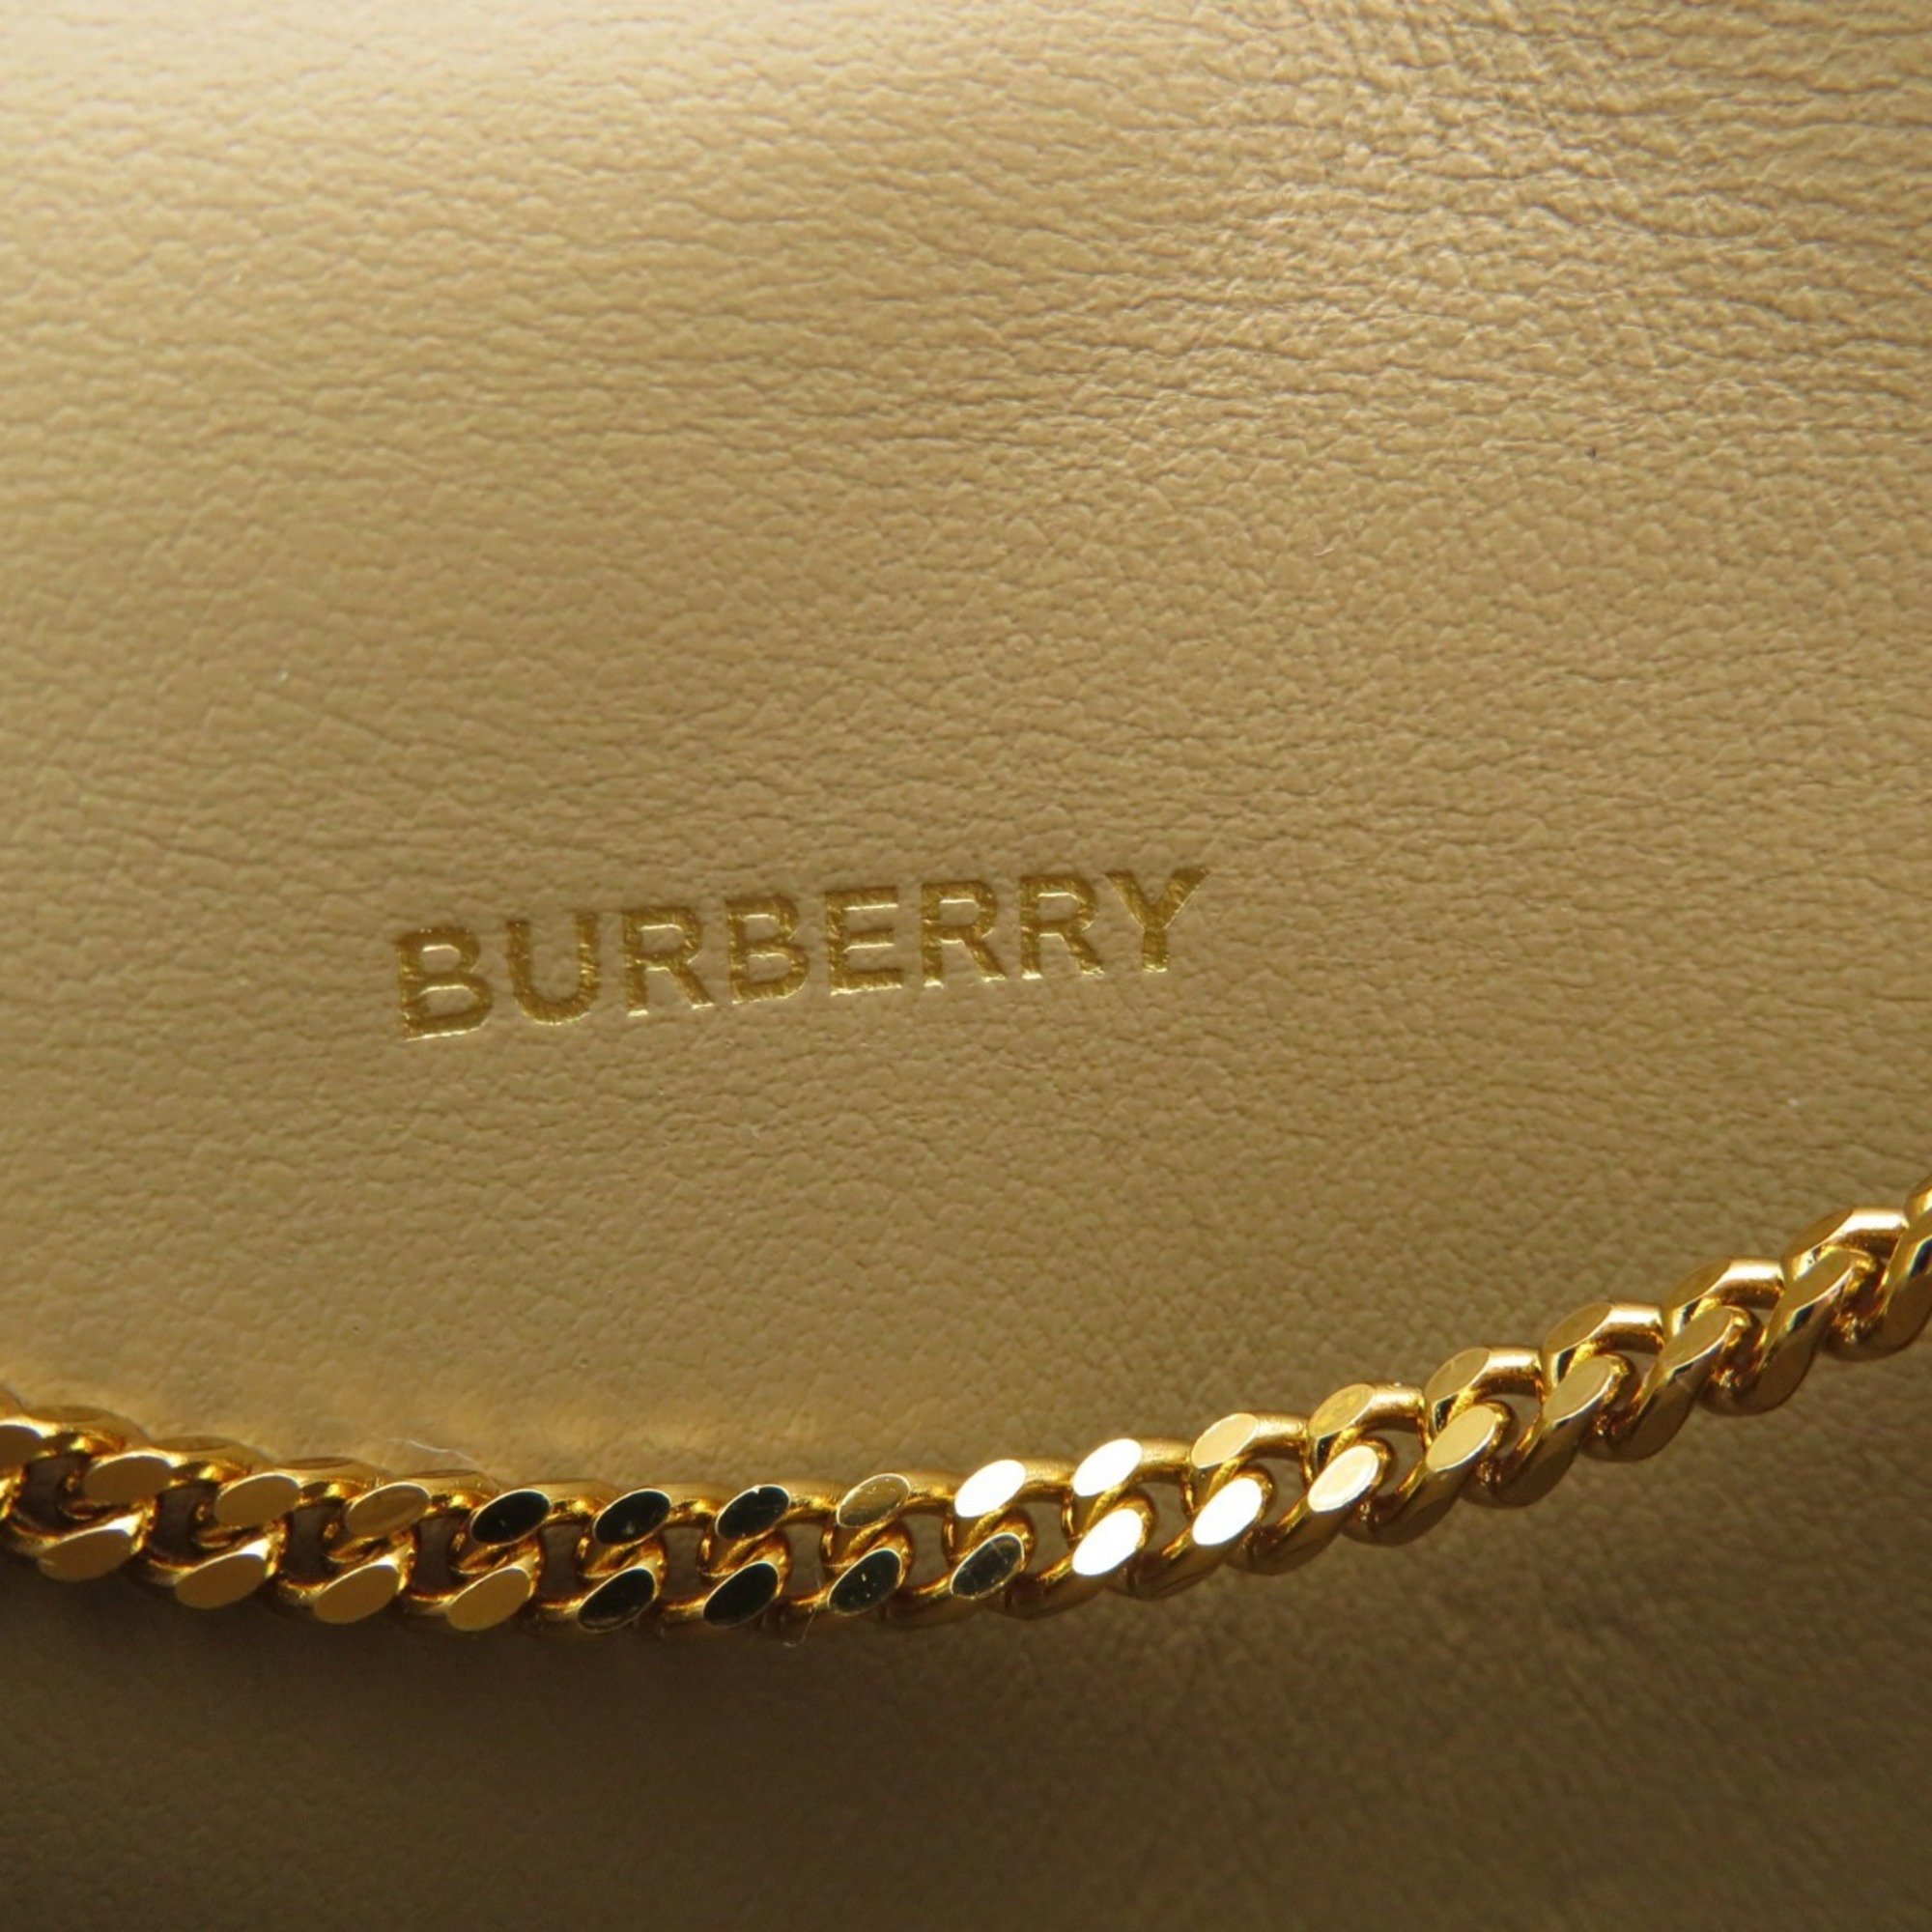 Burberry Coin Chain Wallet Wallet/Coin Case Calf Leather Women's